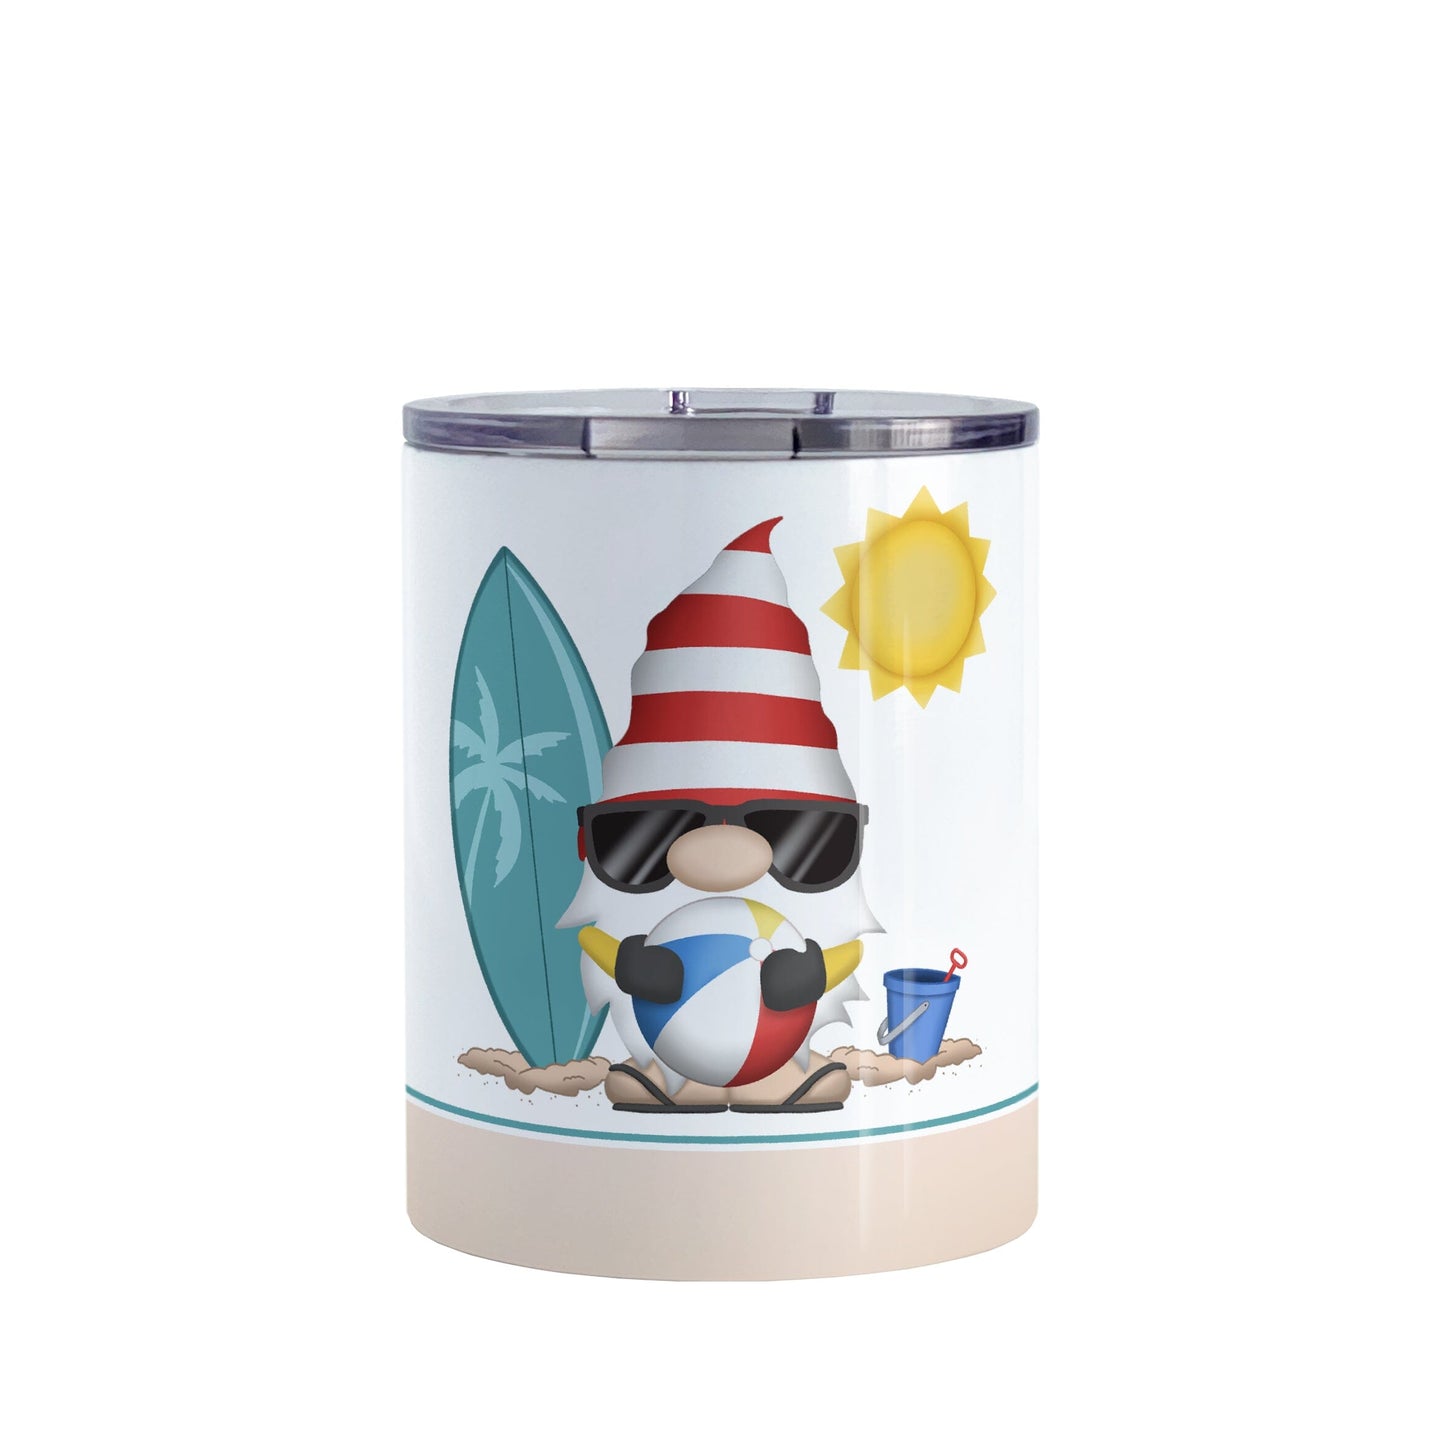 Summer Beach Gnome Tumbler Cup (10oz) at Amy's Coffee Mugs. A stainless steel tumbler cup designed with an adorable gnome in sunglasses, holding a beach ball, with a surfboard and bucket in the sand on either side of him, and a bright yellow sun in the sky. Below the gnome is a sandy beige background color along the bottom of the cup.